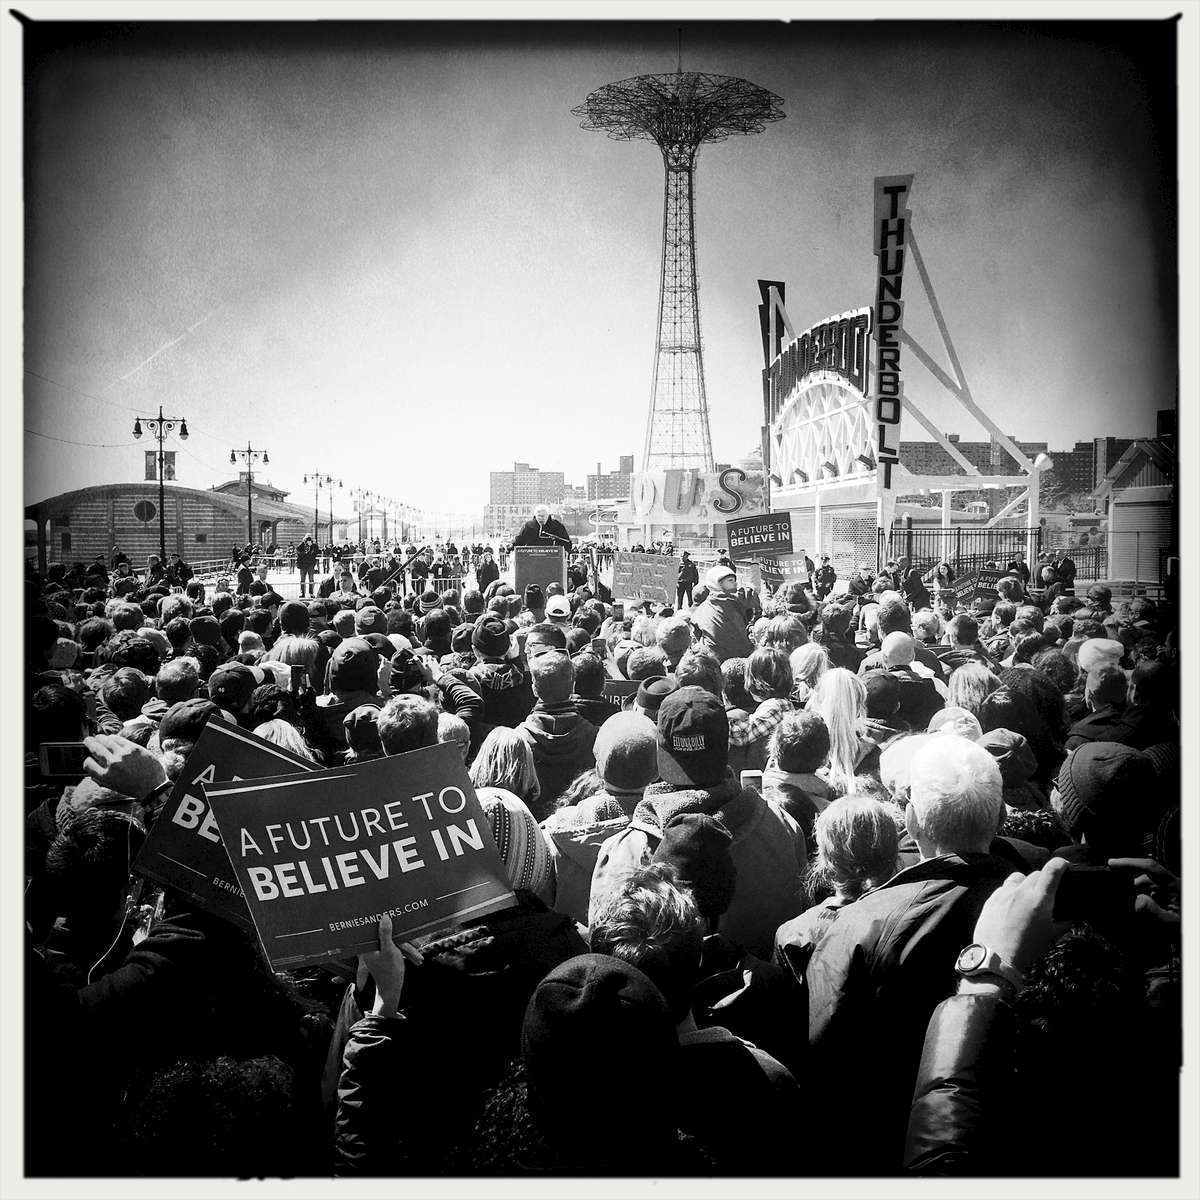 Bernie Sanders and his supporters in Coney Island, Apr. 2016.